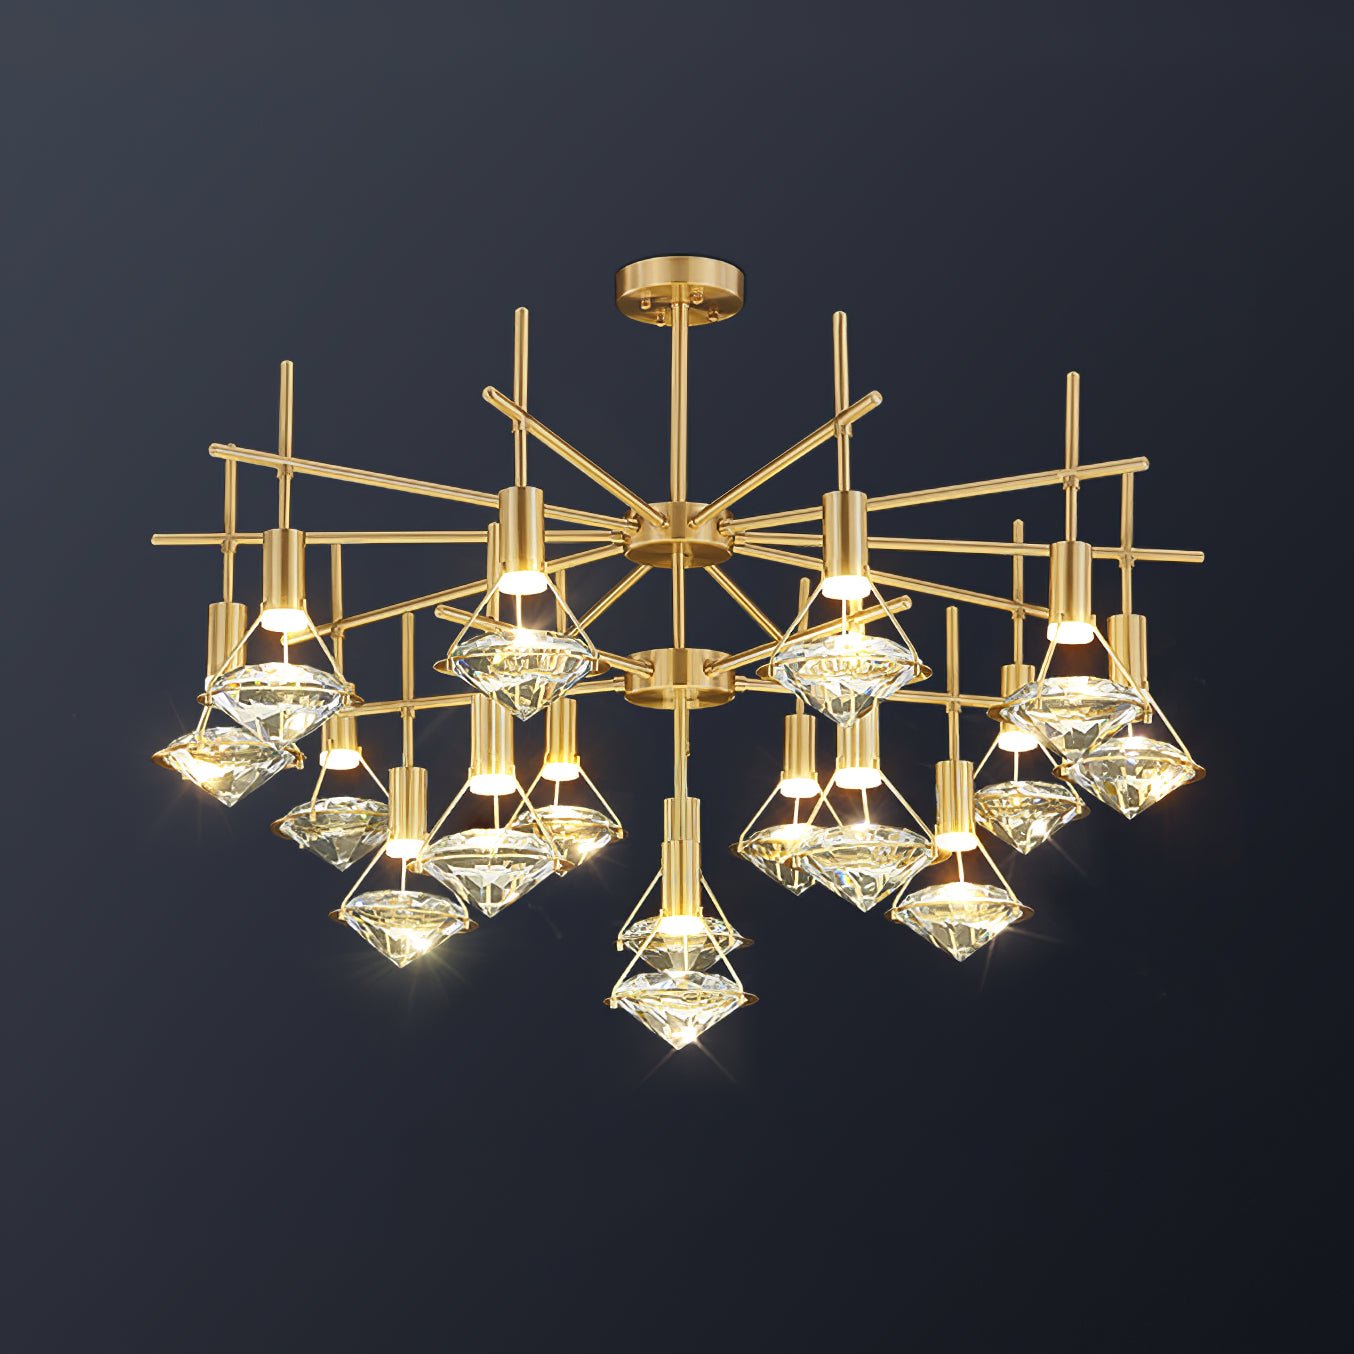 16-Head Diamond Chandelier in Brass and Clear, 37.4" diameter x 27.5" height (95cm x 70cm), with Three-Color Changing Light